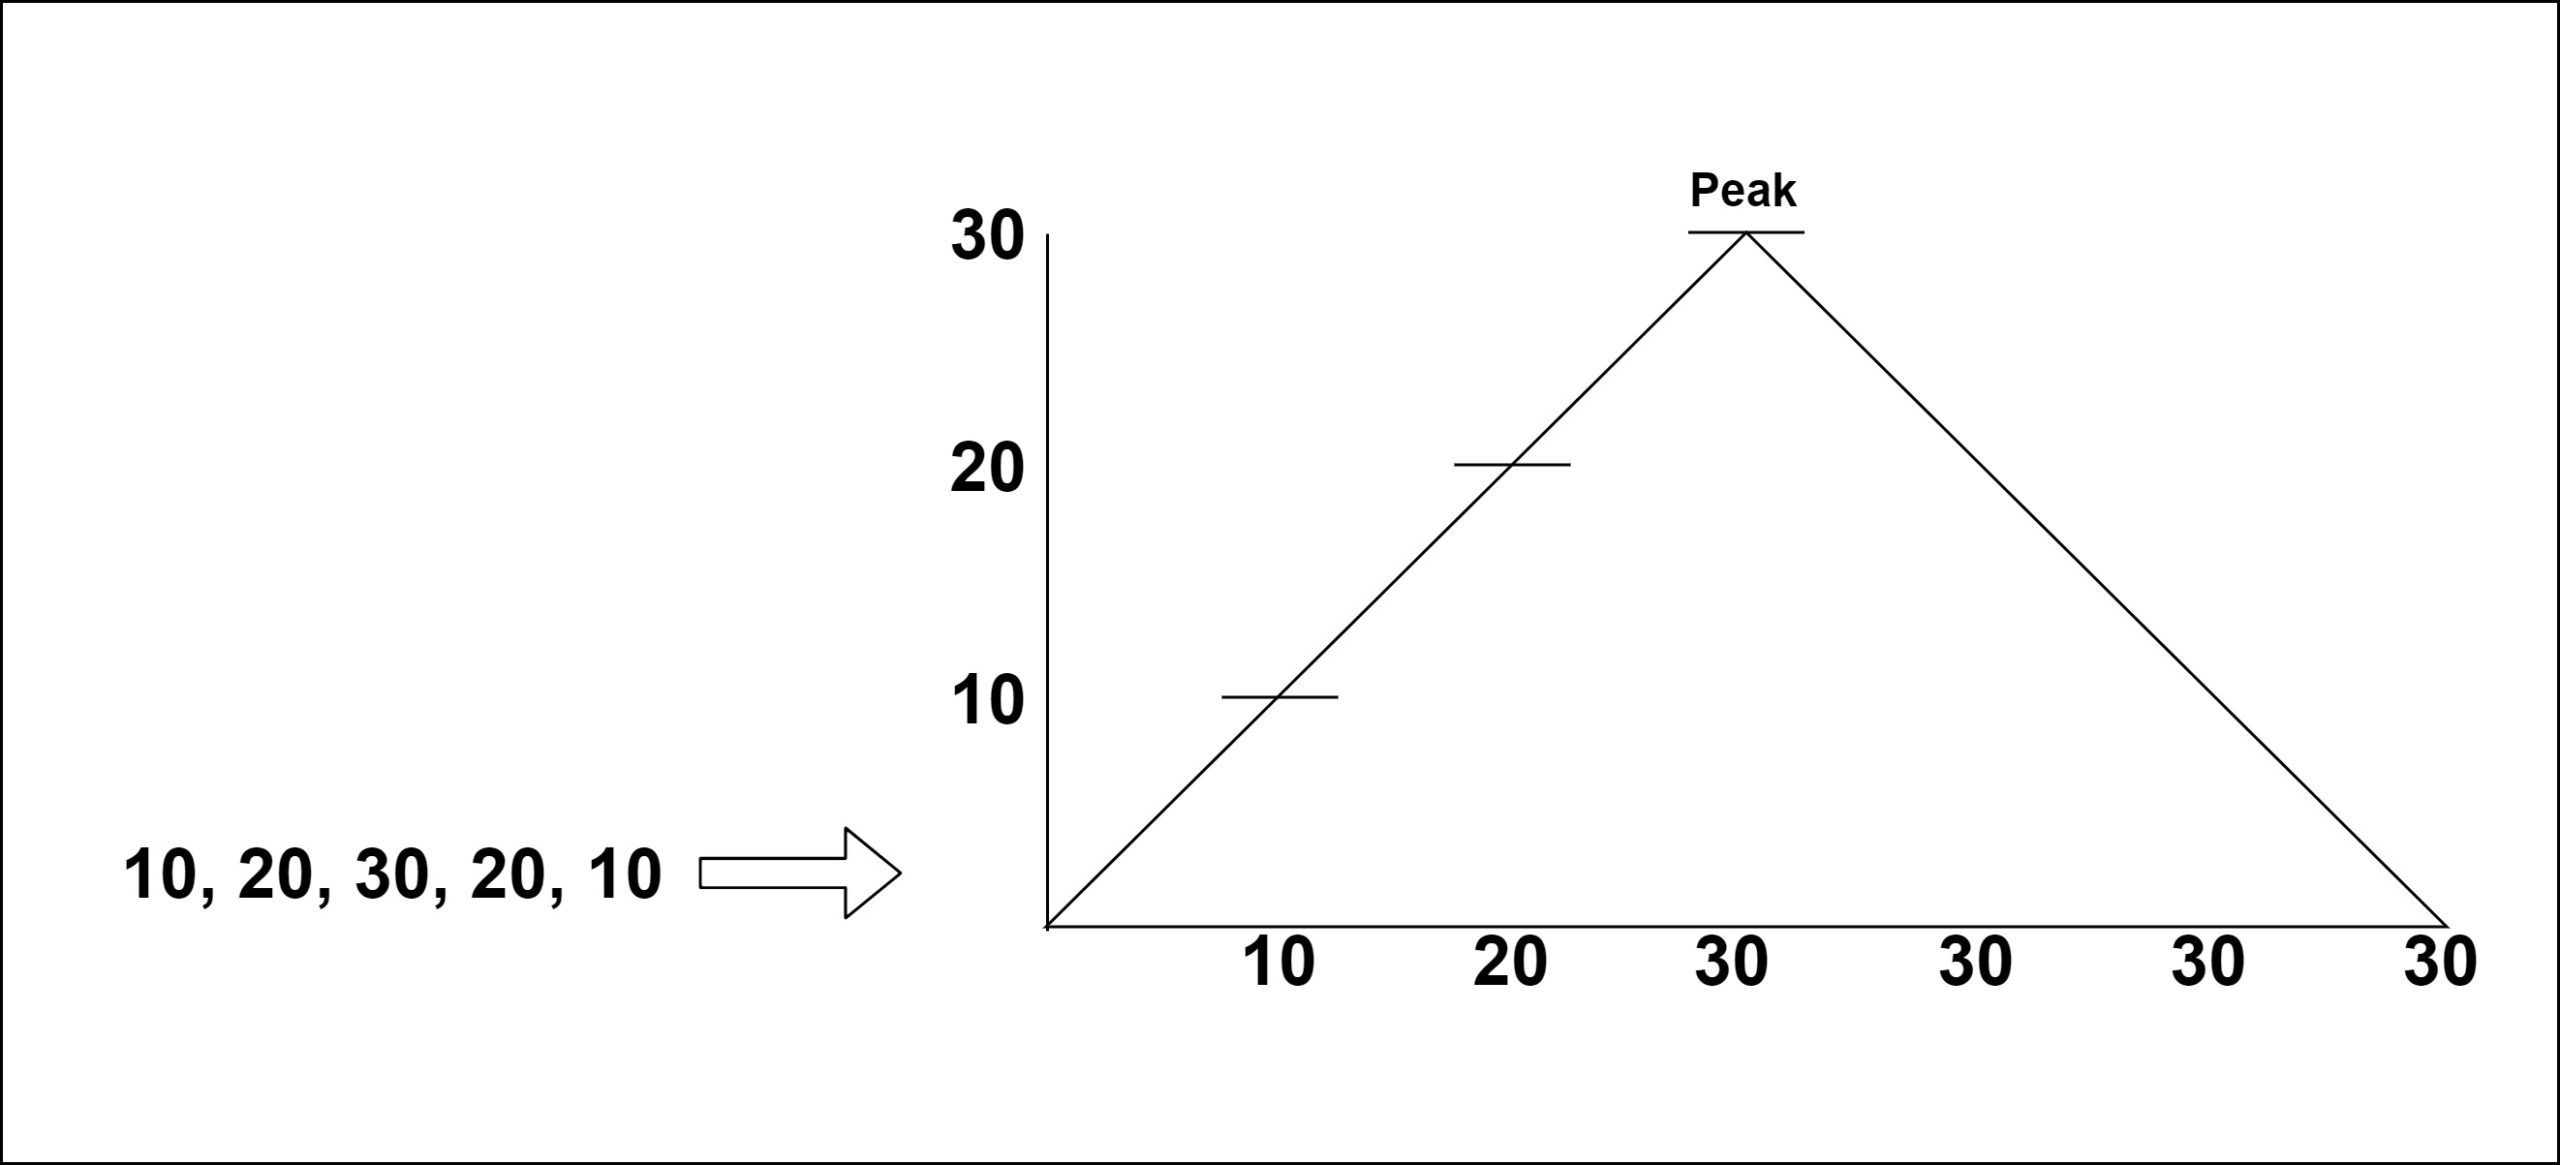 Peak Index in a Mountain Array